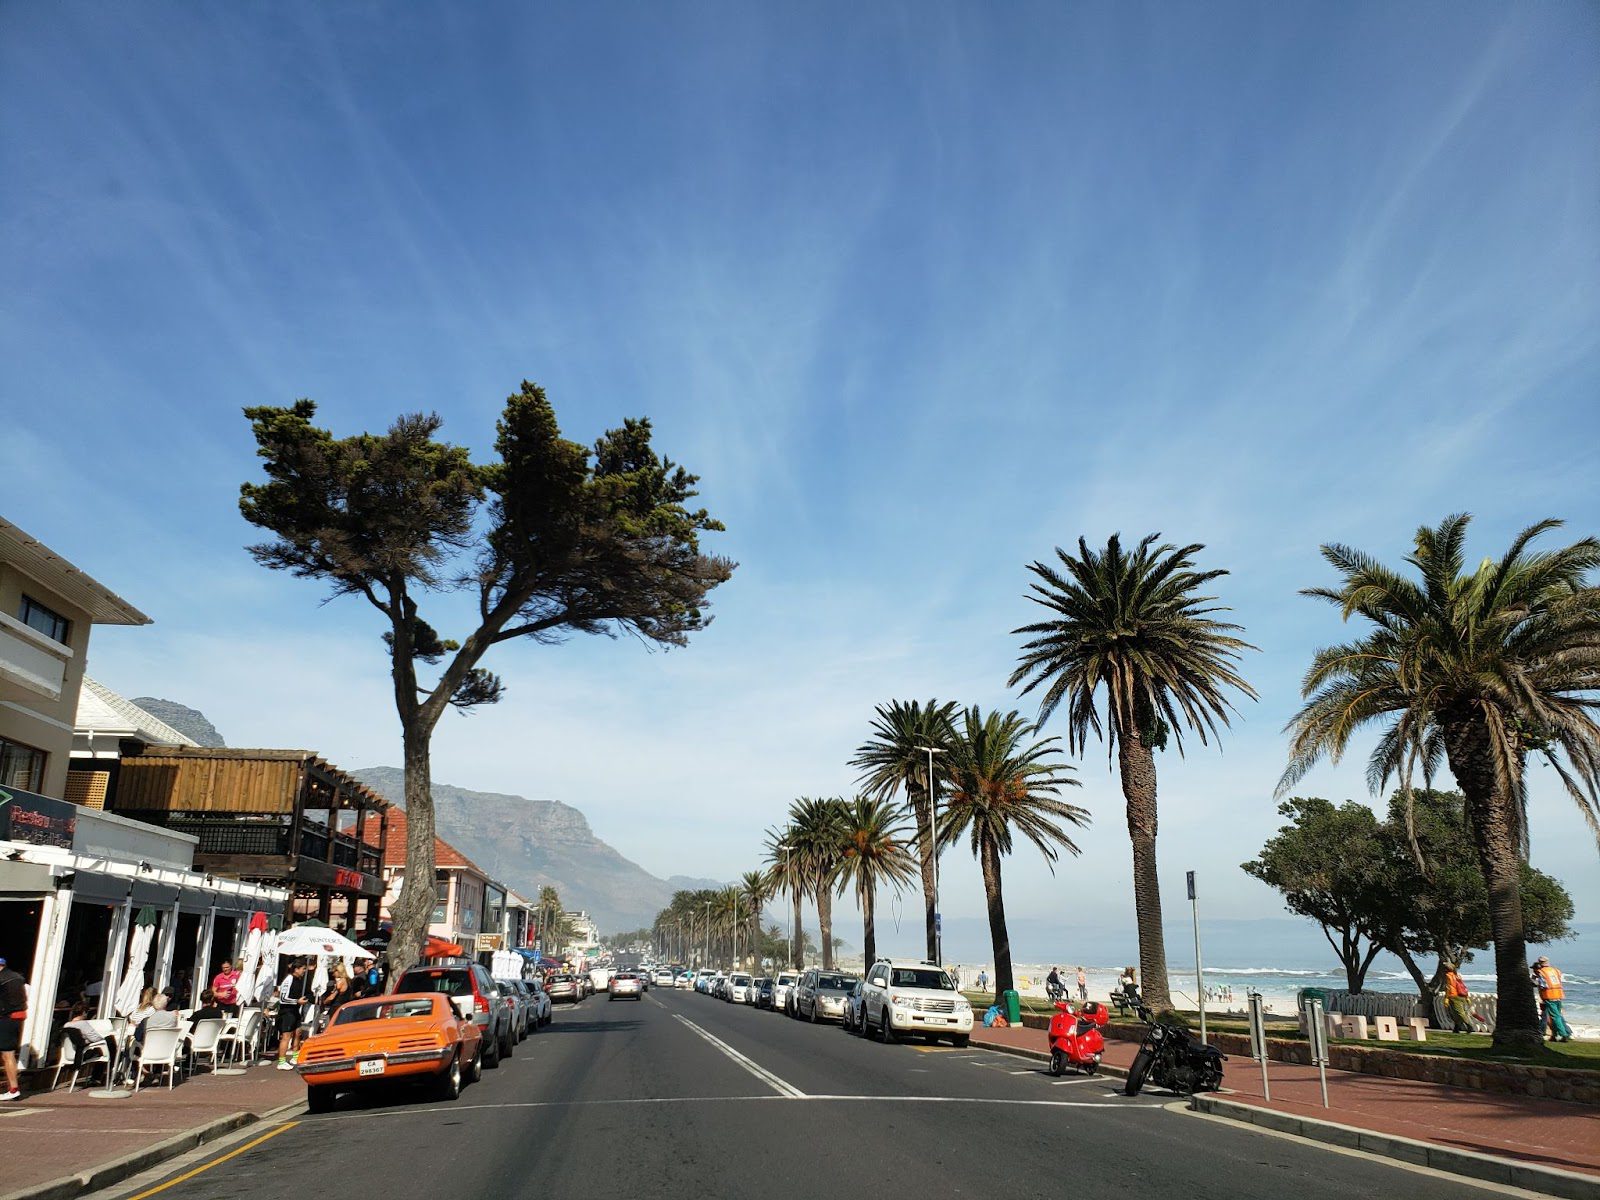 Road view of a coastal road in Seapoint, Cape Town]